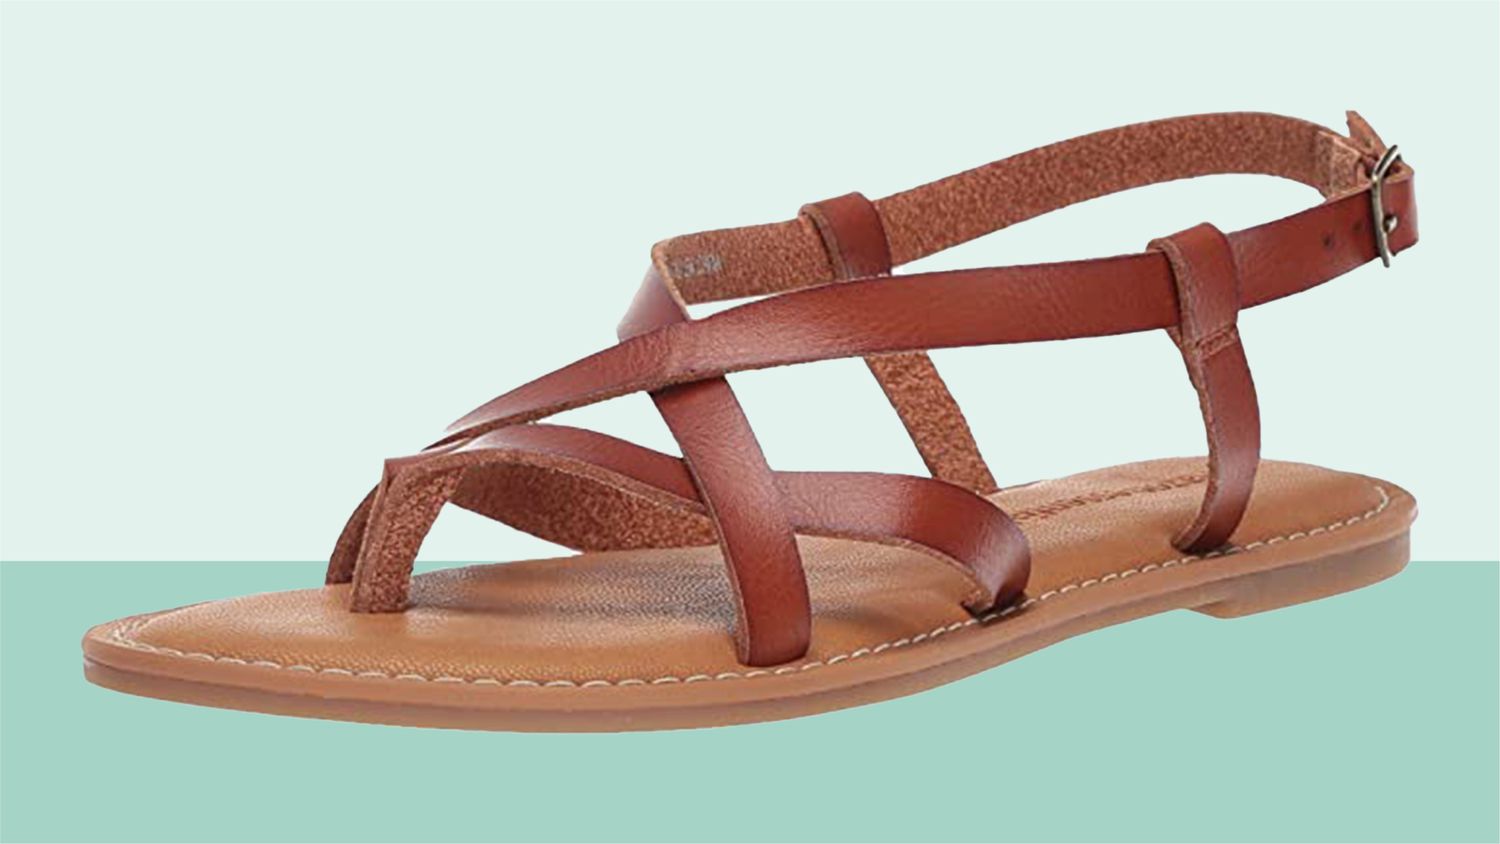 Essentials Women's Flat with Sling Back Sandal